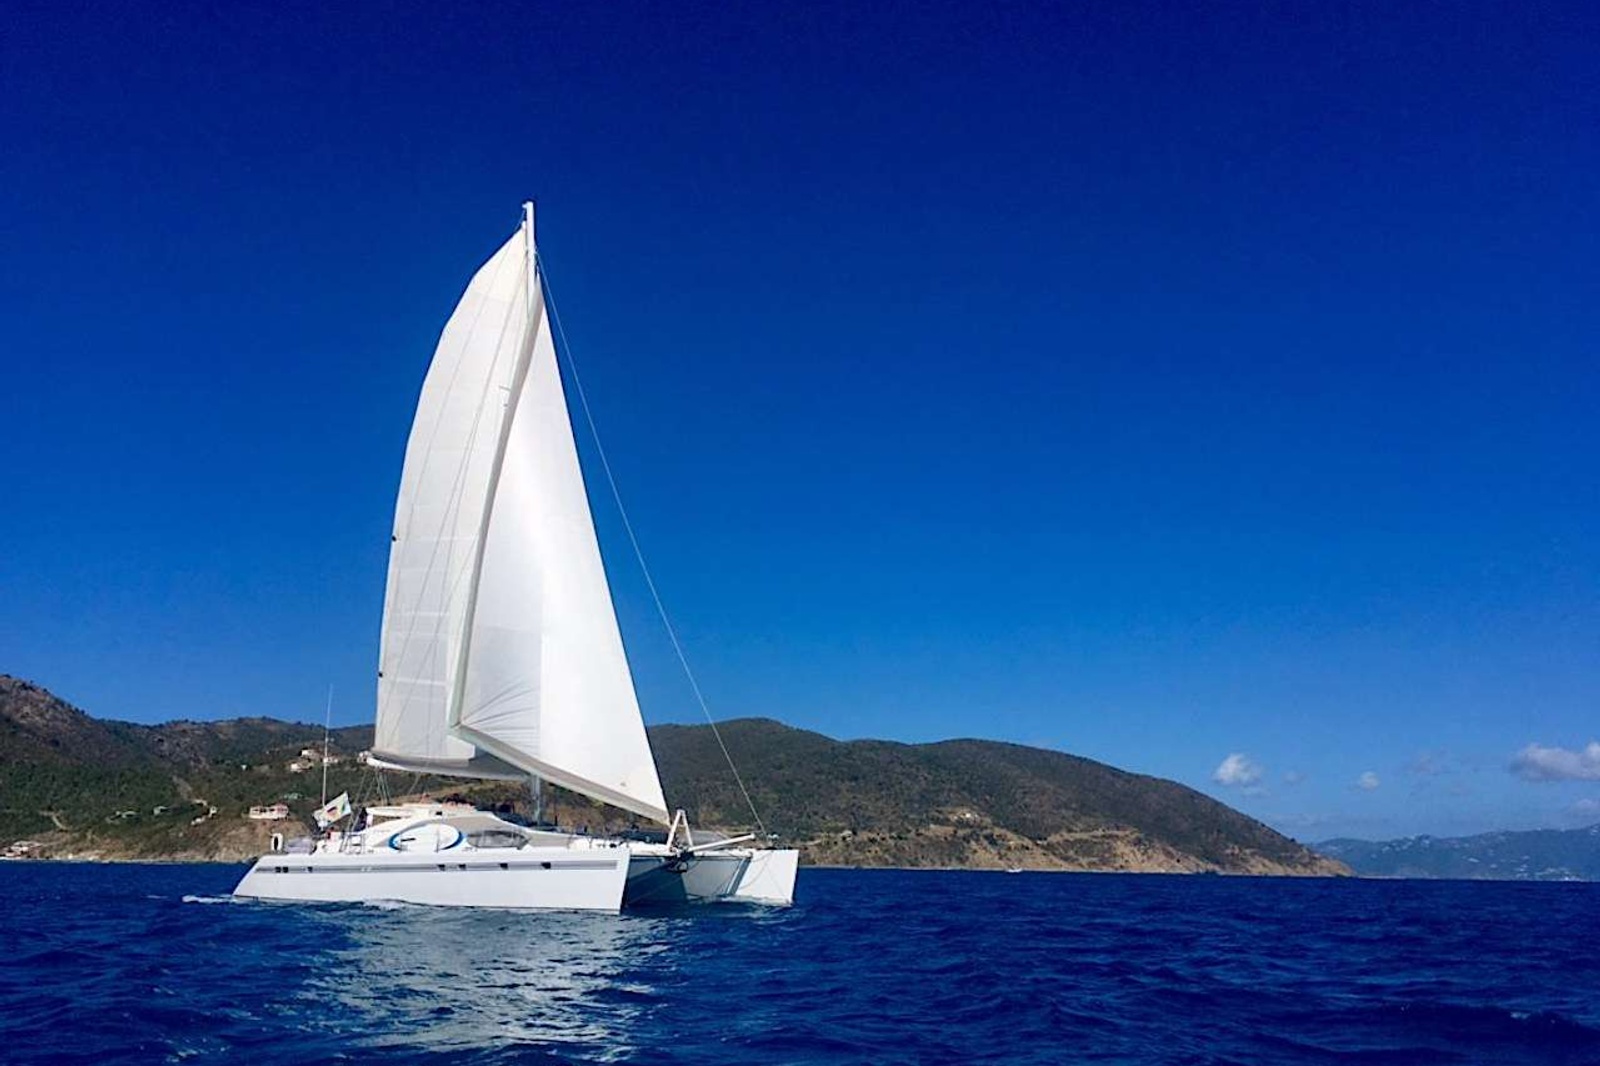 Catamaran KELEA, a 60 ft Privilege accommodating up to 10 guests in cruising comfort, with a master king guest suite, and 4 equal queen-berth guest suites.